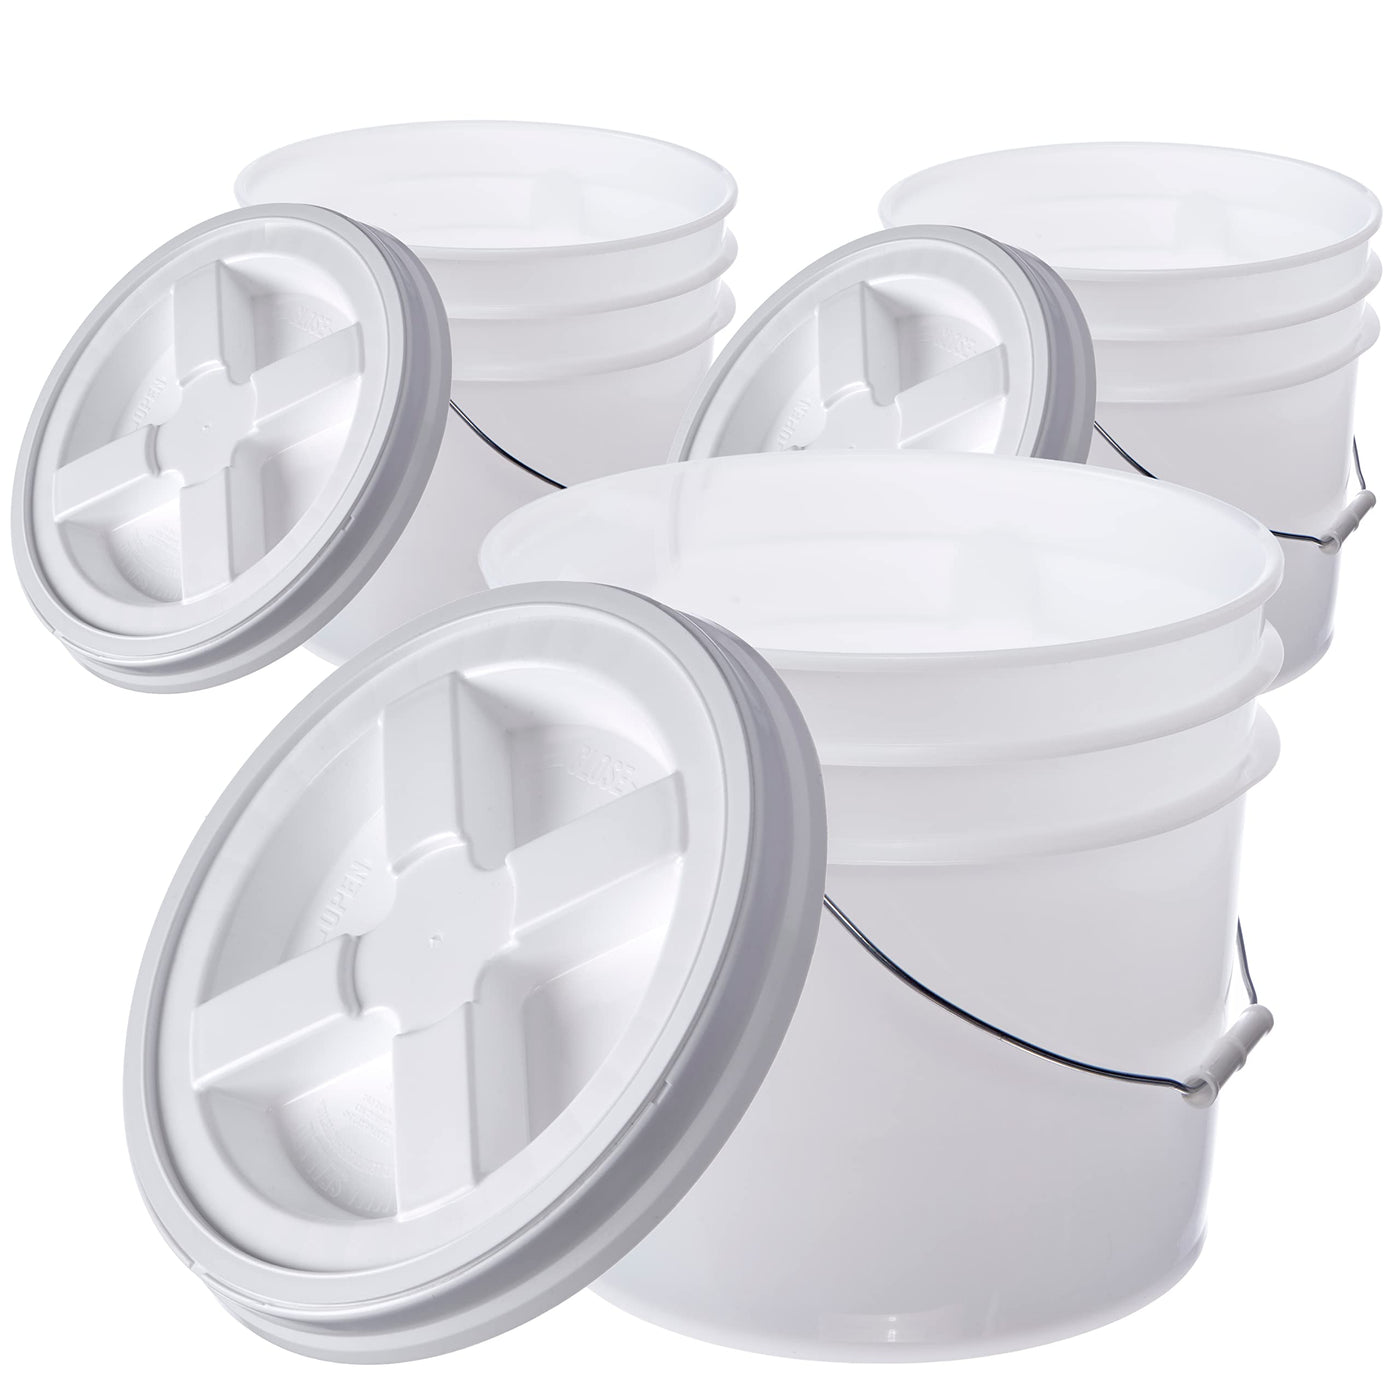 6 Pack 5 Gallon Buckets With Lid White BPA Plastic Food Grade Bucket Lids